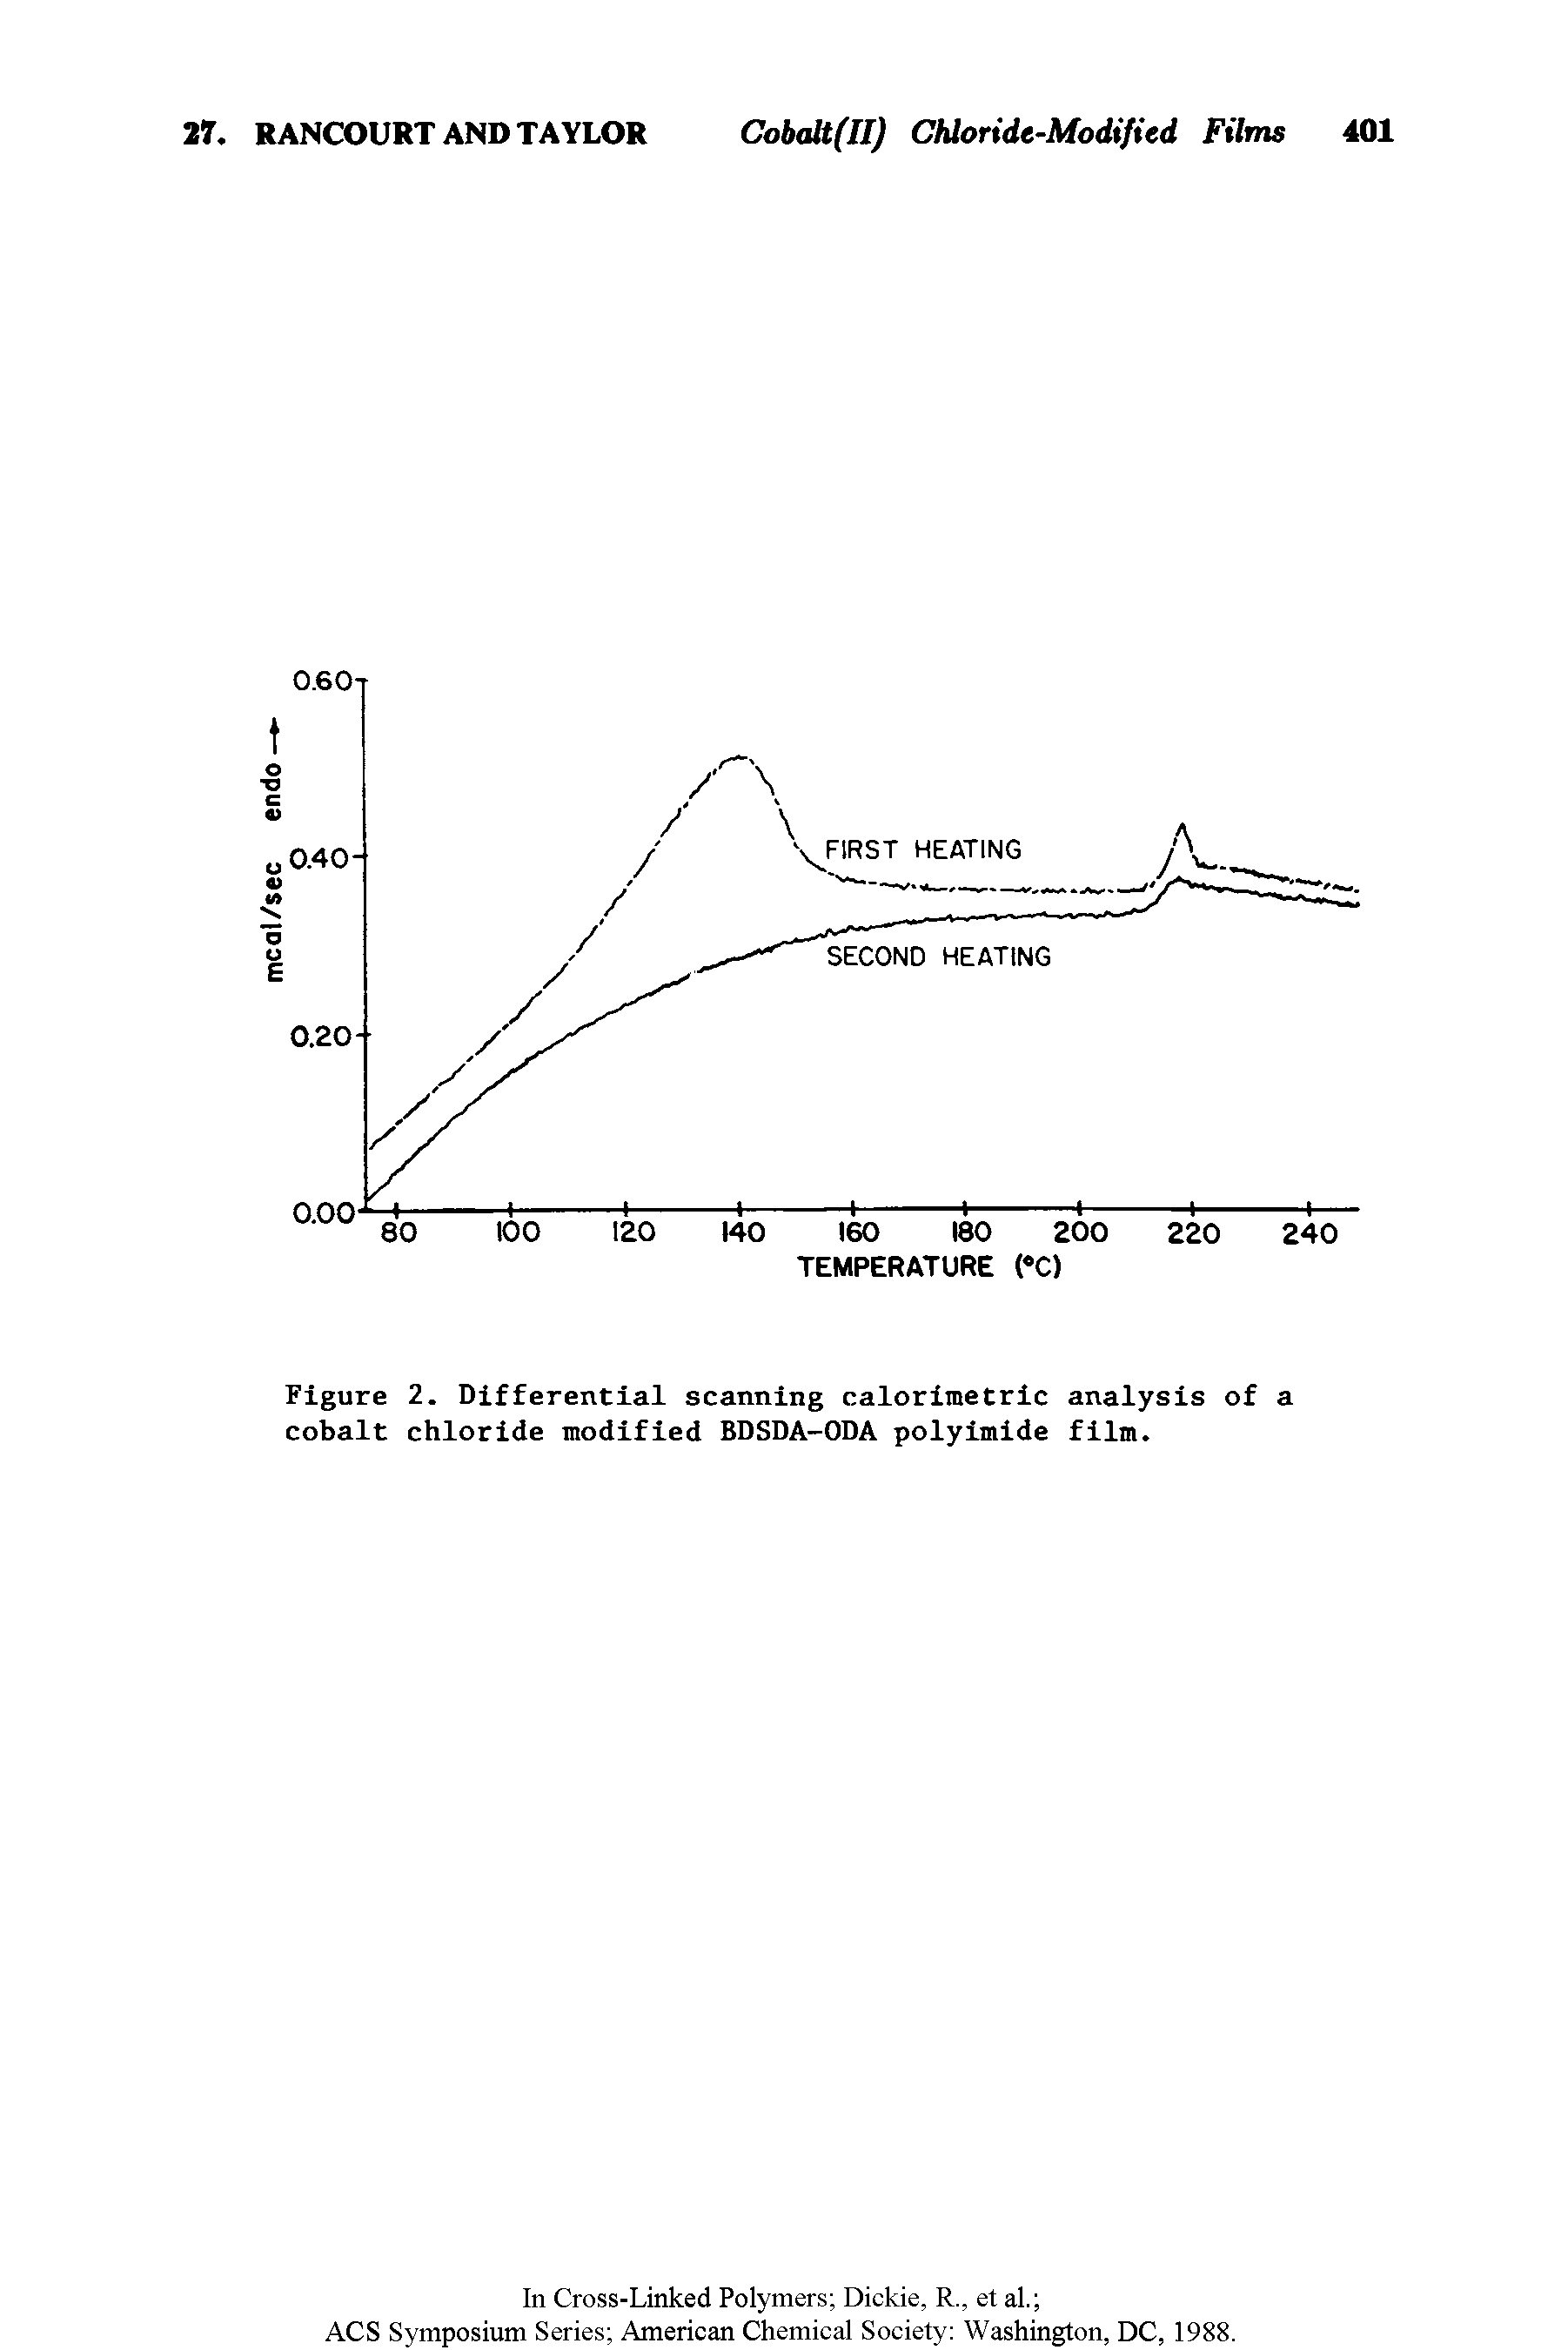 Figure 2. Differential scanning calorimetric analysis of a cobalt chloride modified BDSDA-ODA polyimide film.